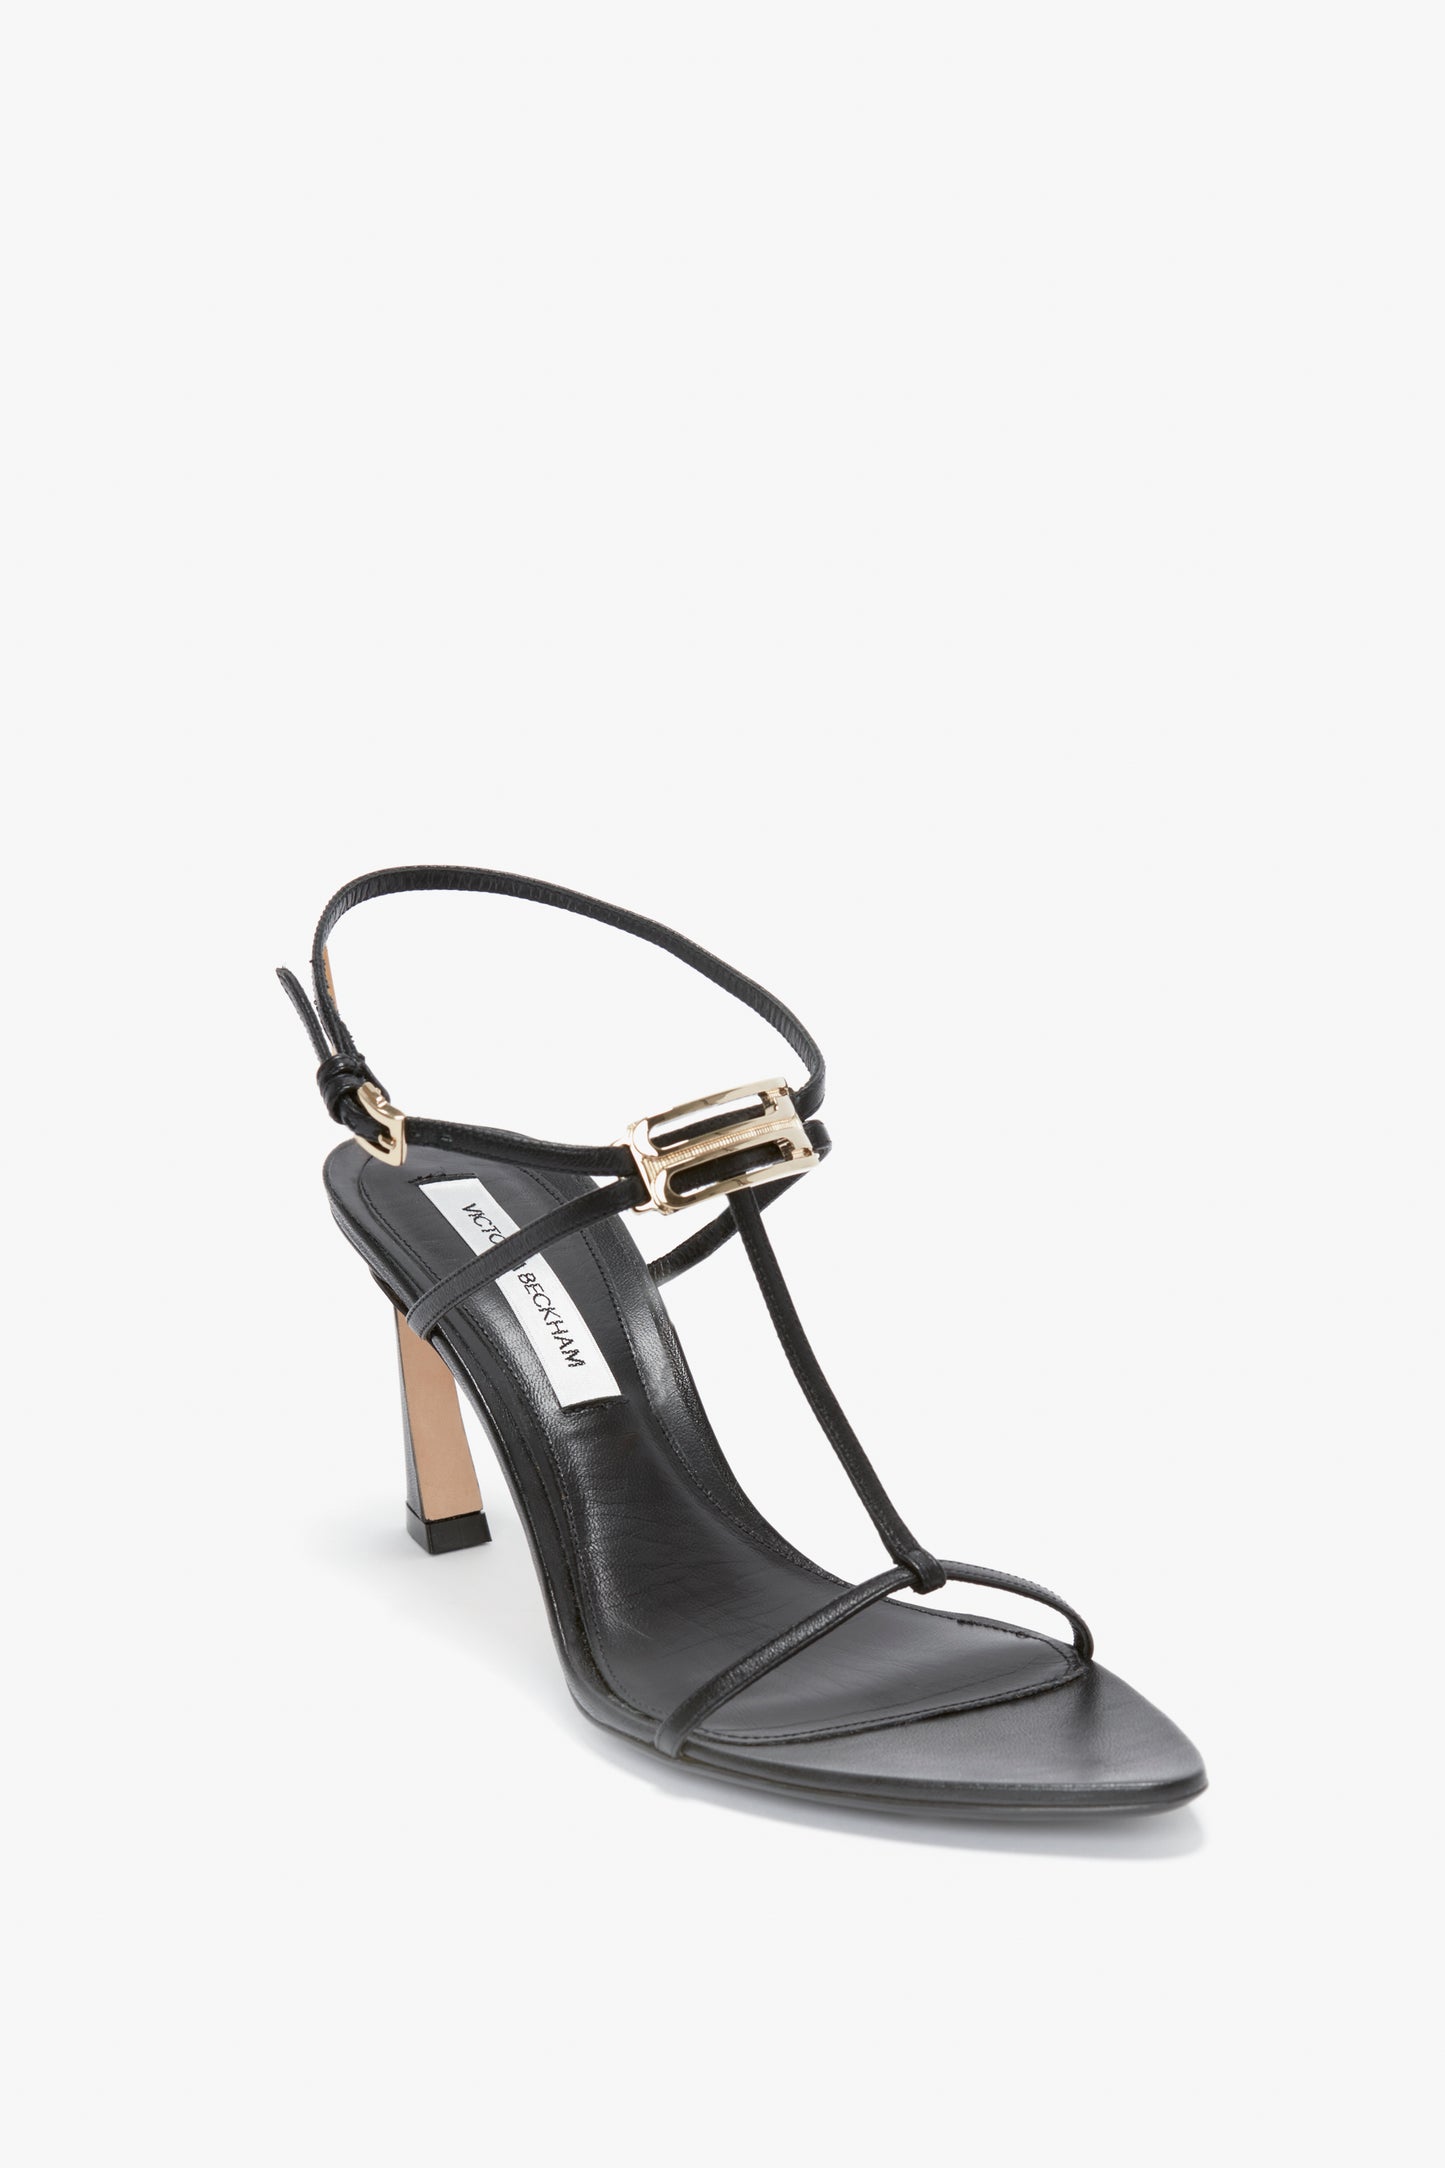 A Victoria Beckham Frame Detail Sandal In Black Leather with thin nappa leather straps, an adjustable ankle strap, and a gold buckle.